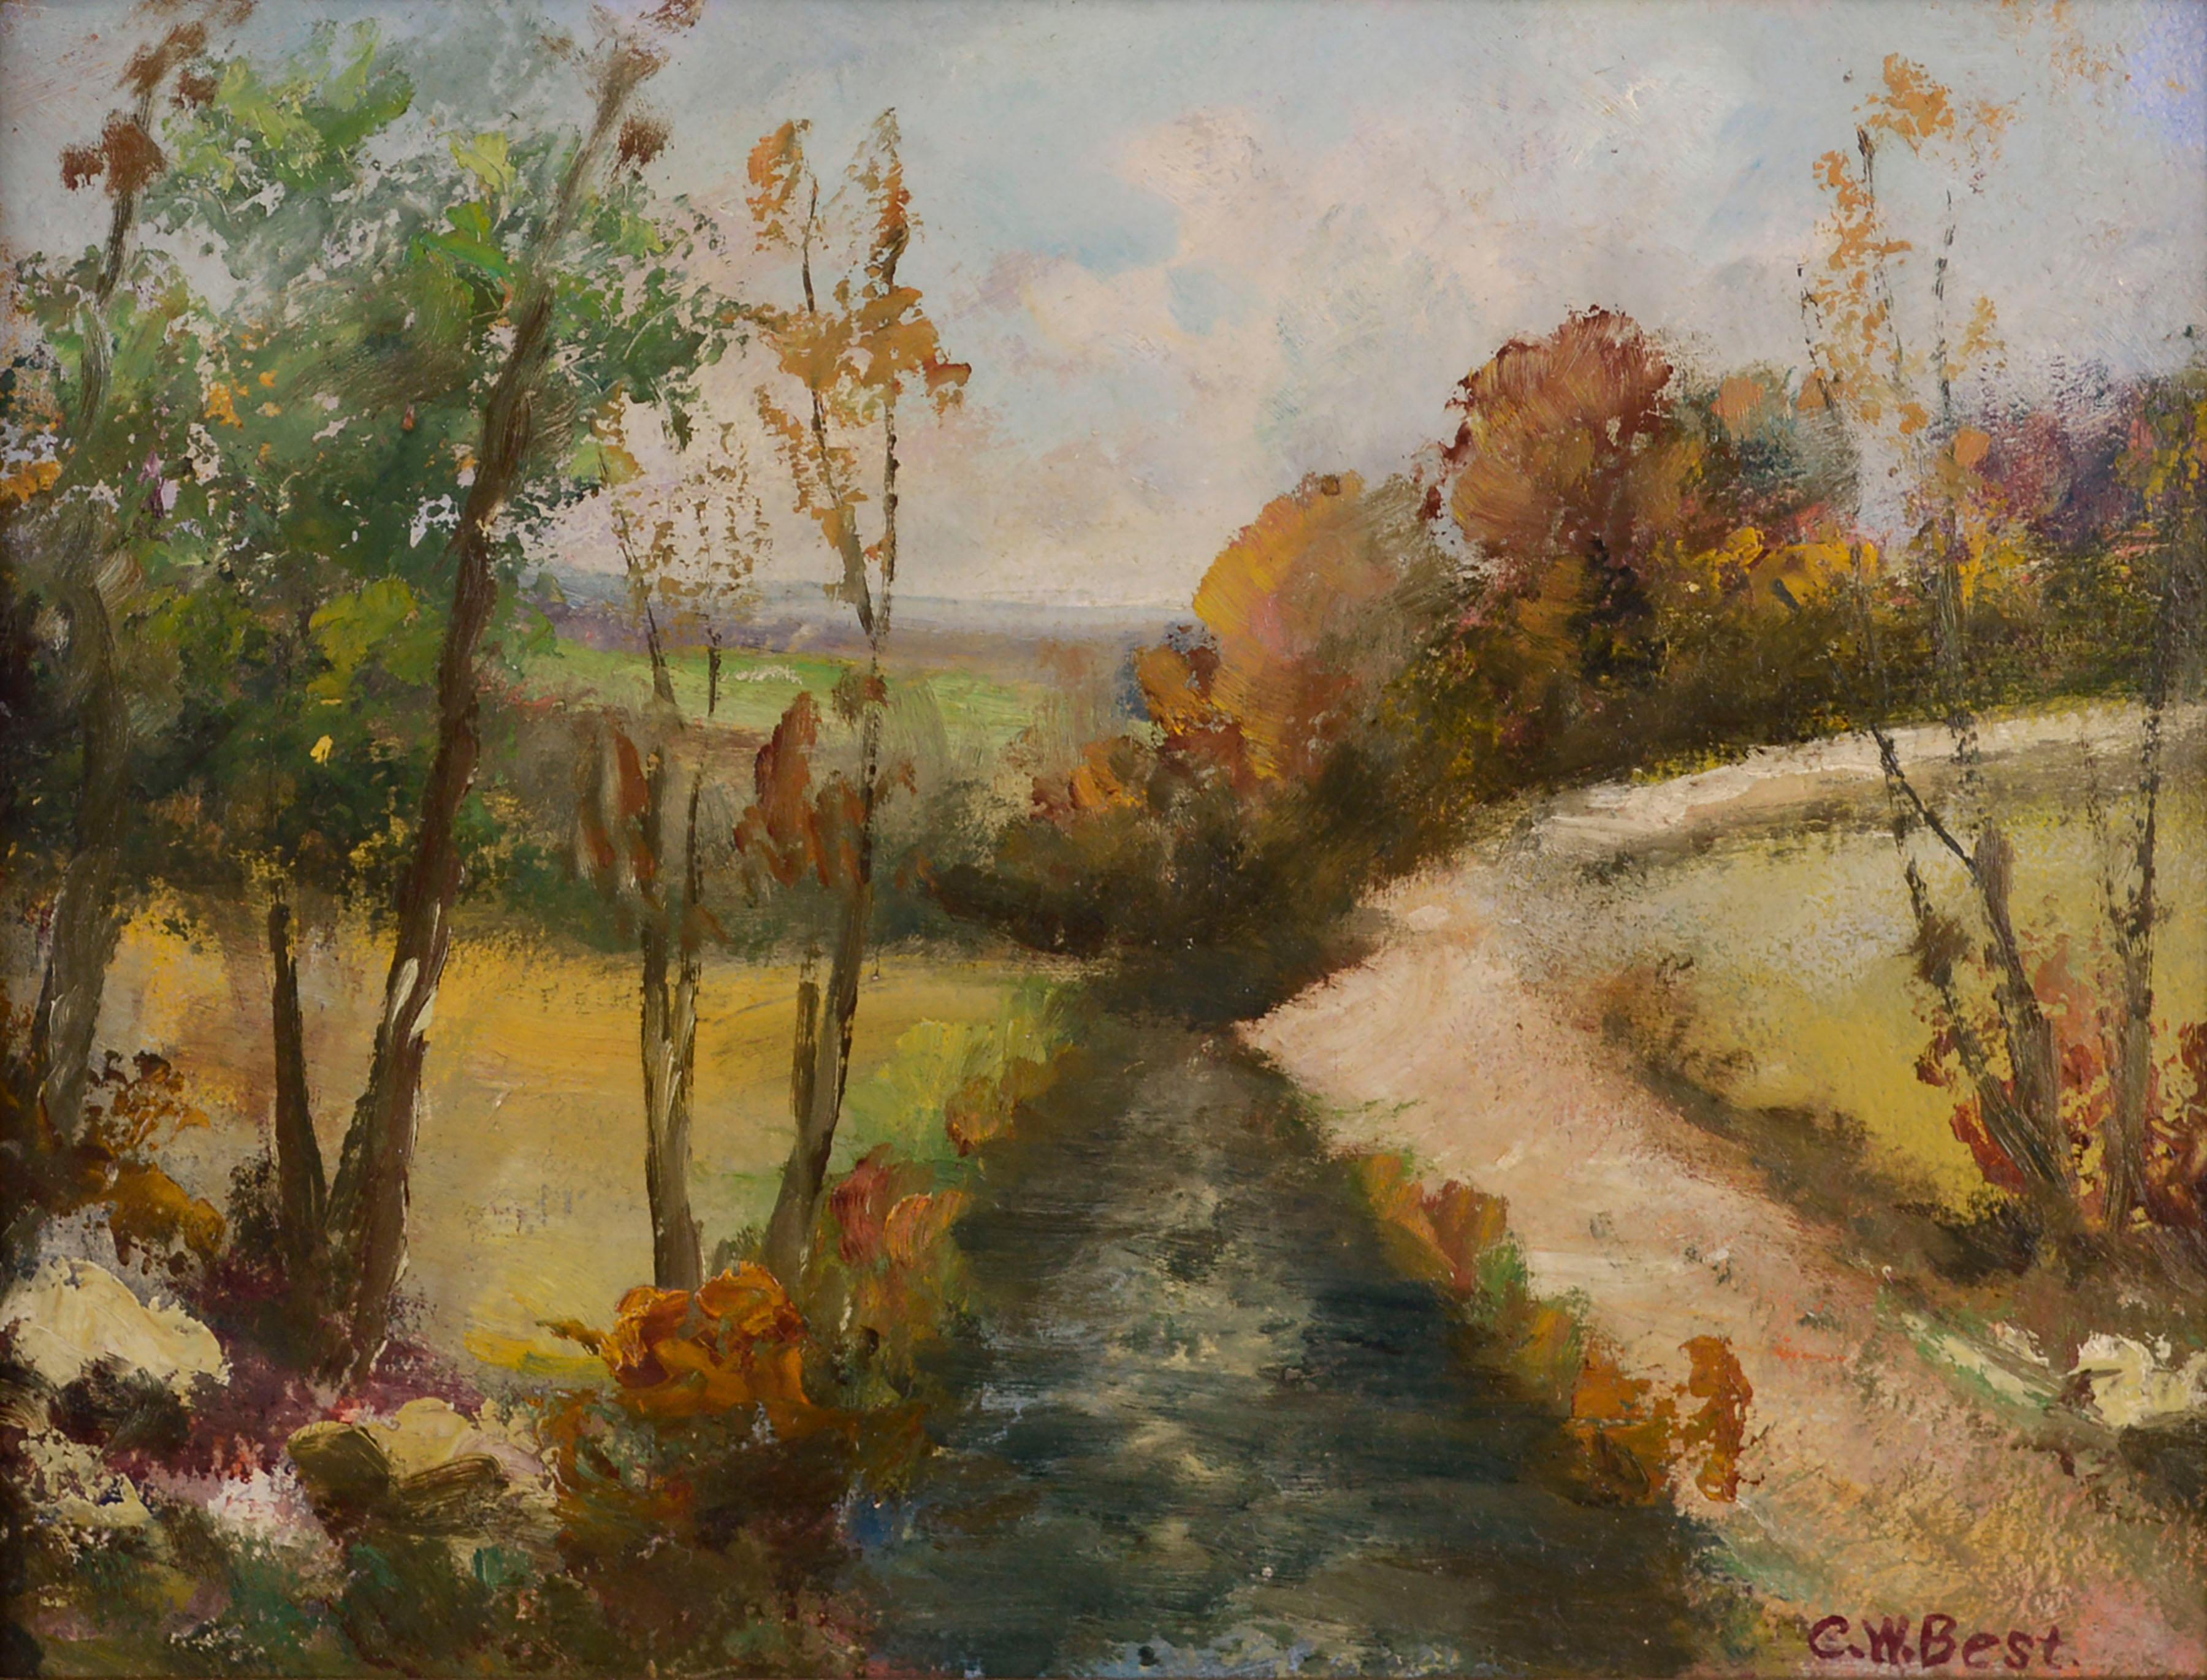 Bucks County, Country Lane - Mid Century Landscape  - Painting by Cora W. Best 